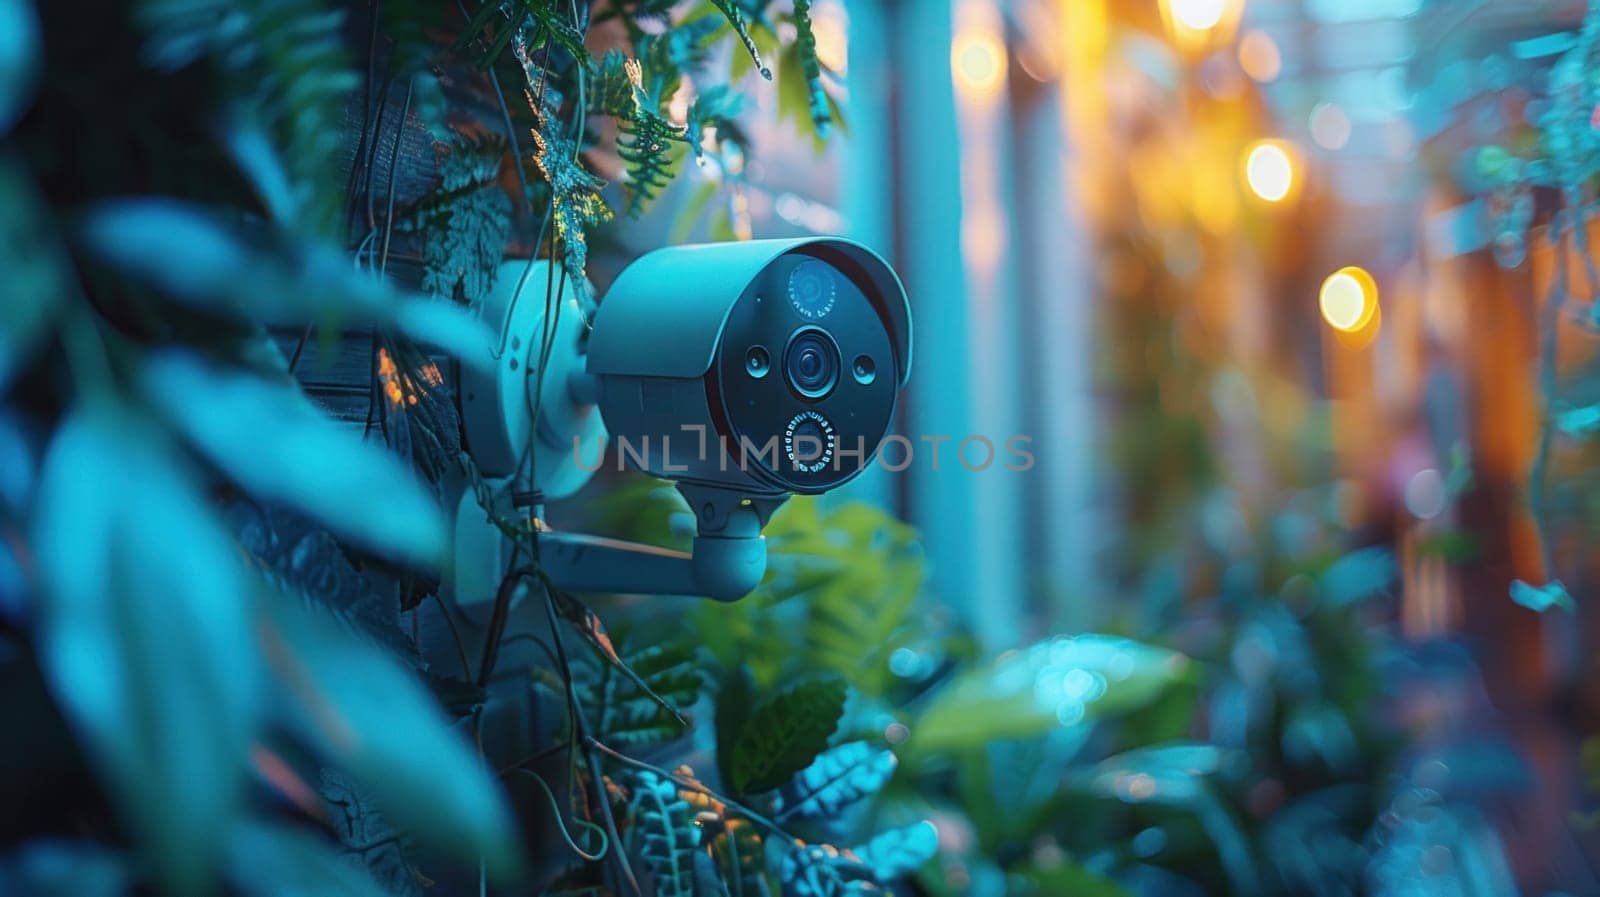 Security Camera Mounted on Garden Wall by but_photo